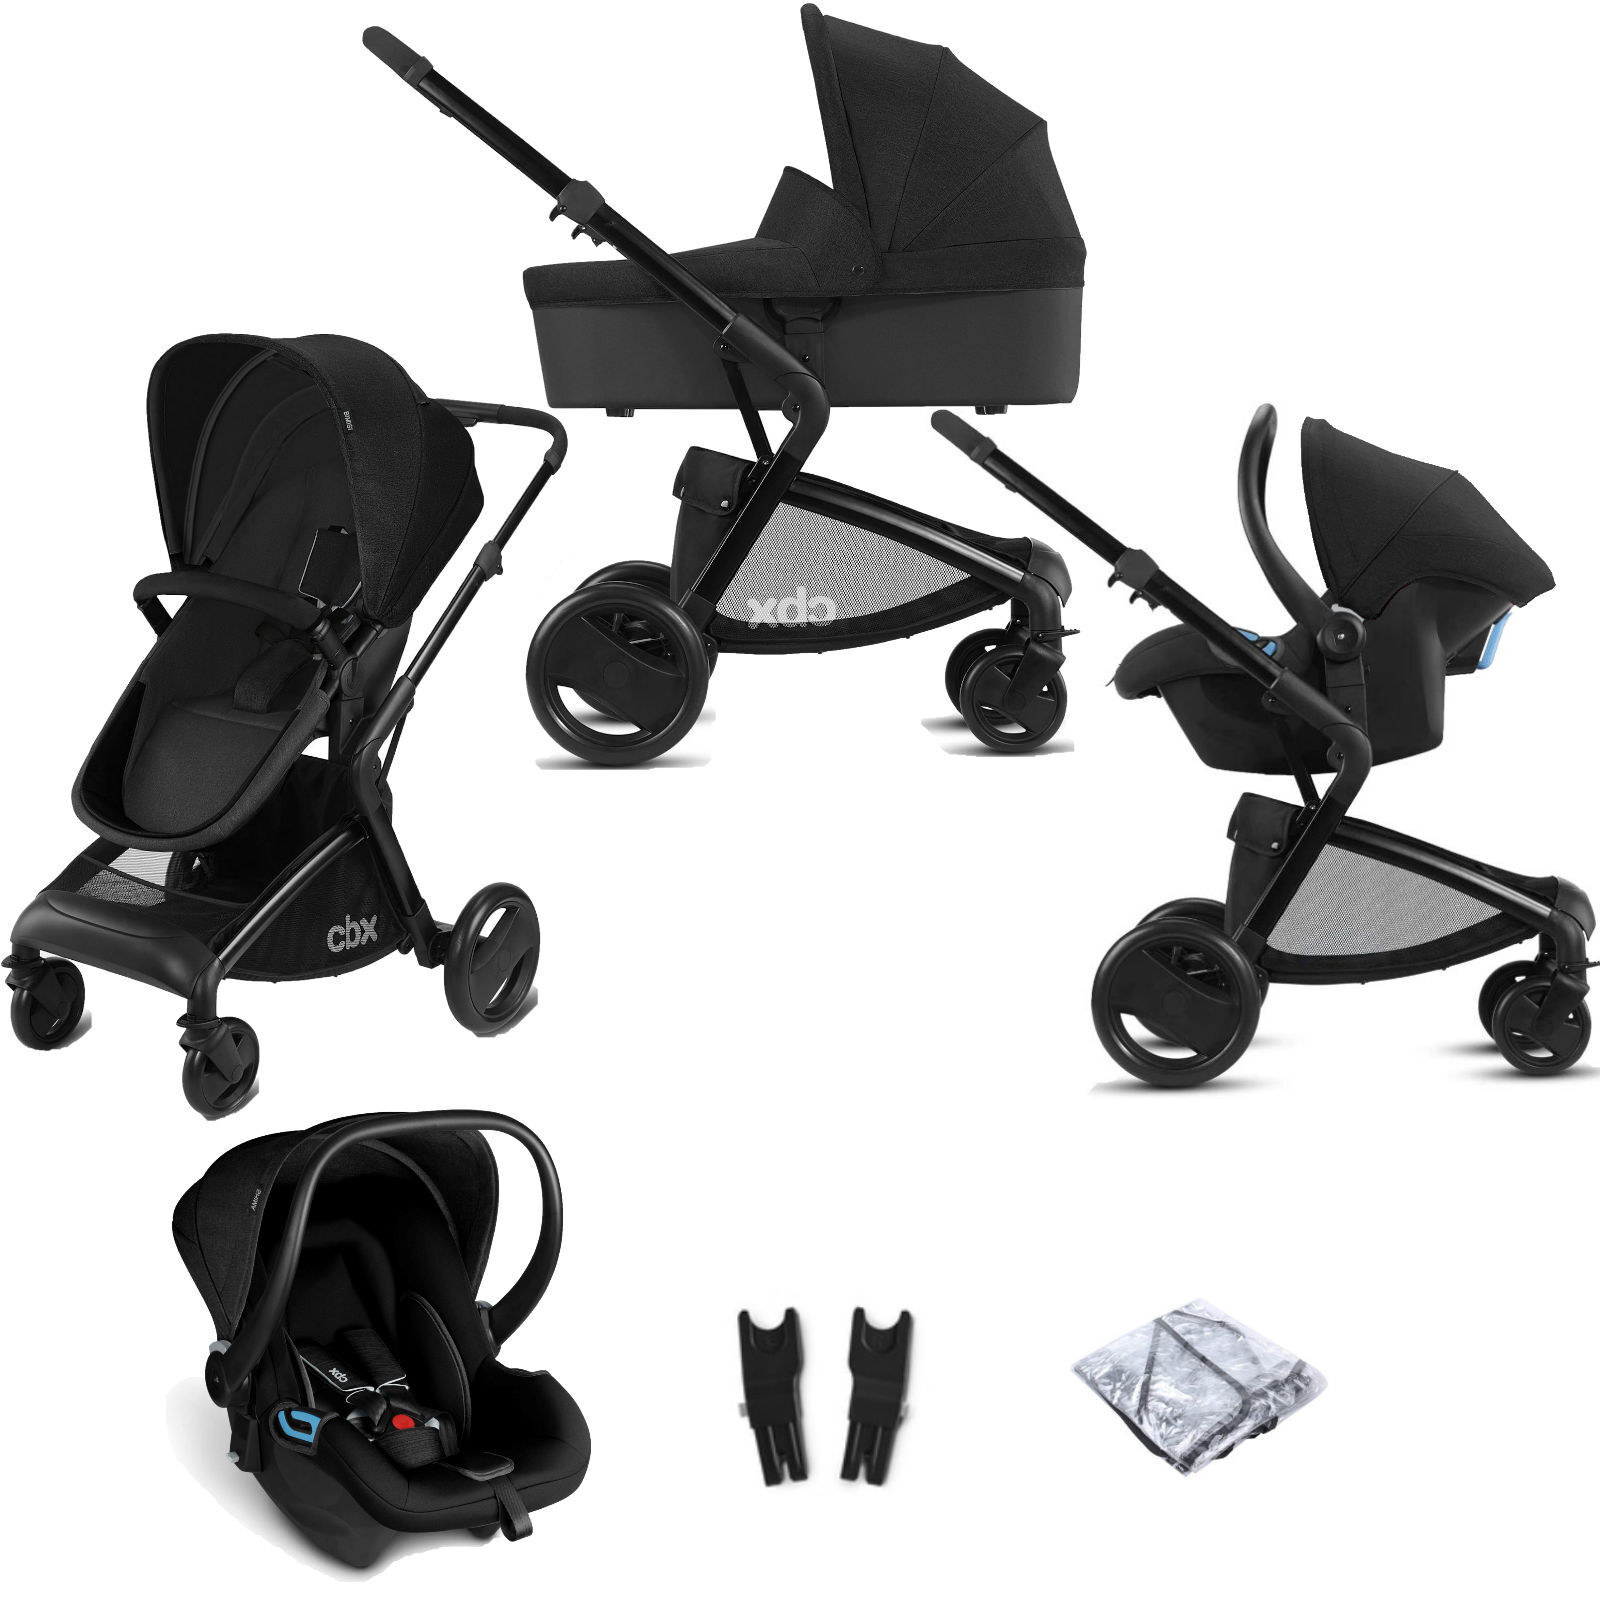 CBX Cybex CBX Bimisi Pure (Shima) Travel System with Carrycot - Smoky Anthracite